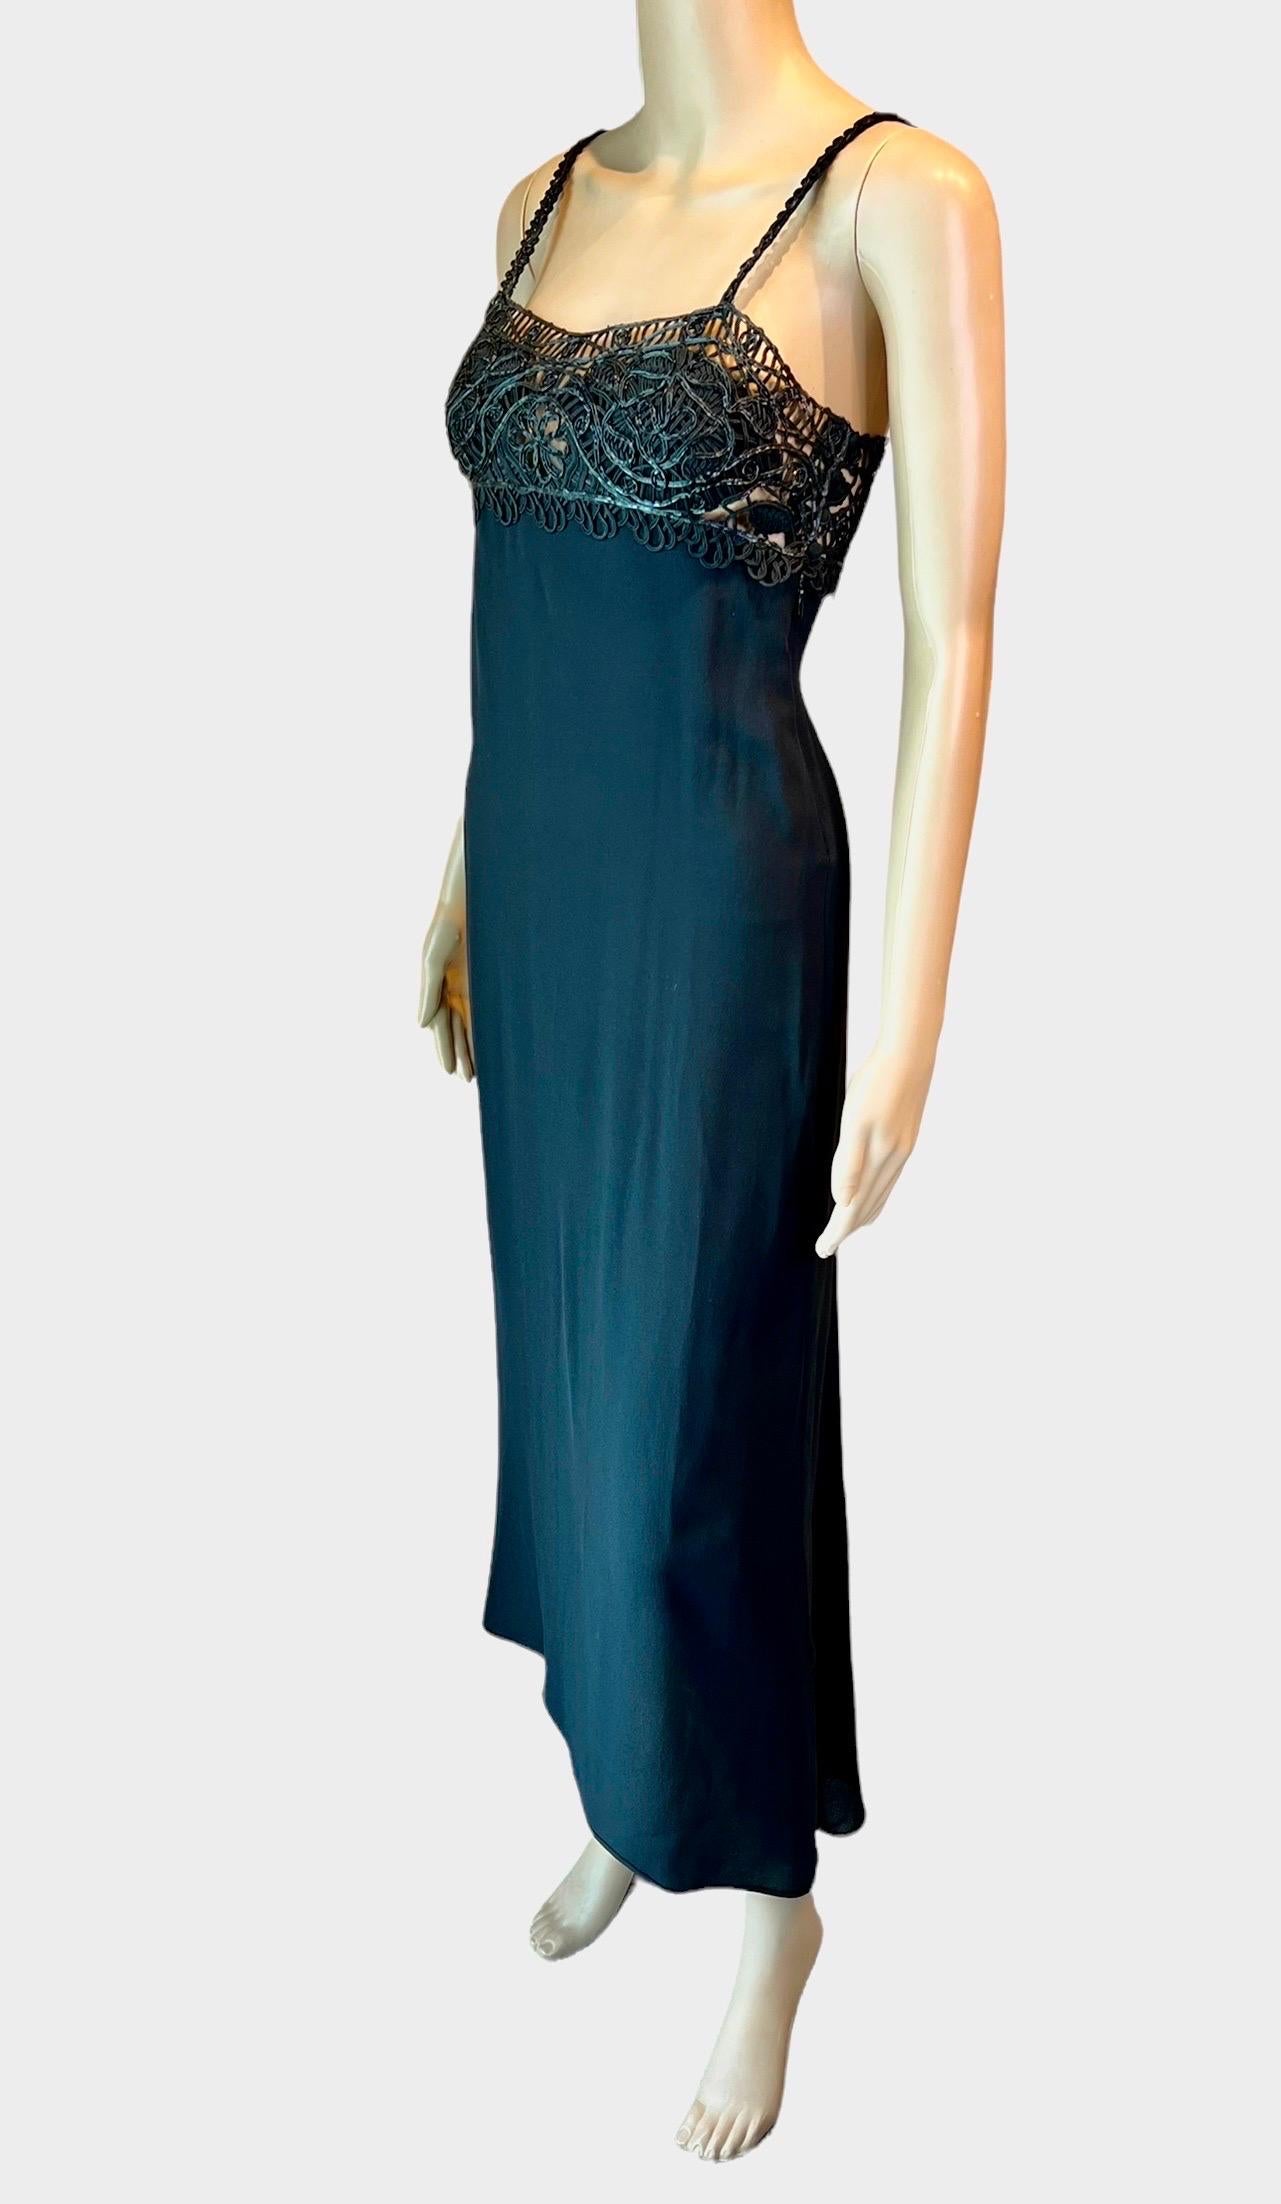 Gianni Versace S/S 1997 Runway Embroidered Lace Black Evening Dress Gown  For Sale 1